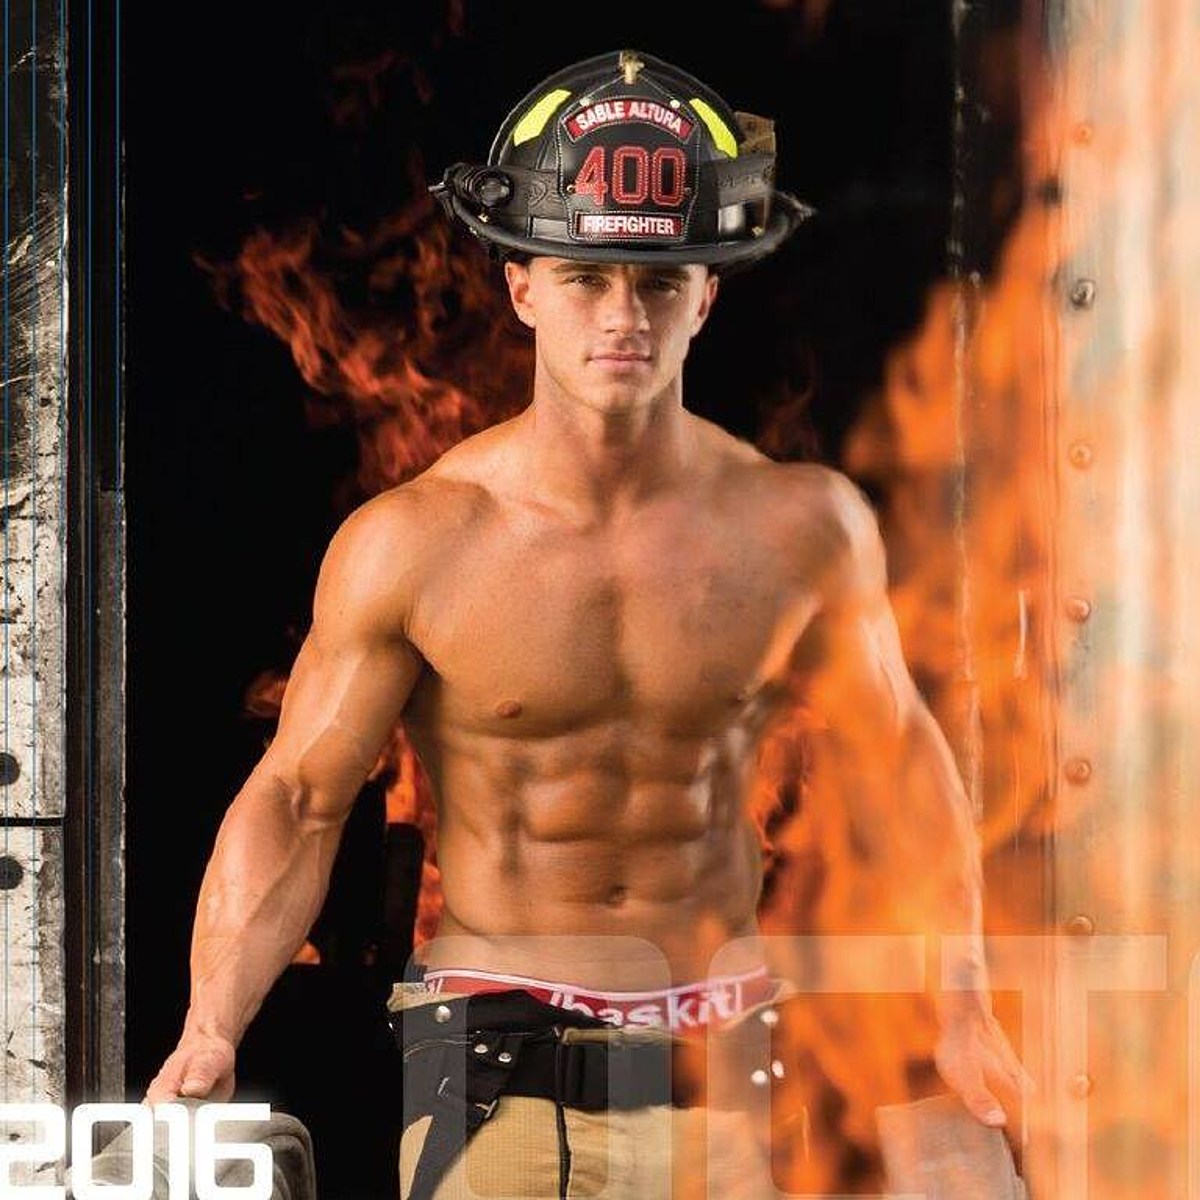 Colorado Firefighter Calendar s 2018 Reveal Party is Saturday